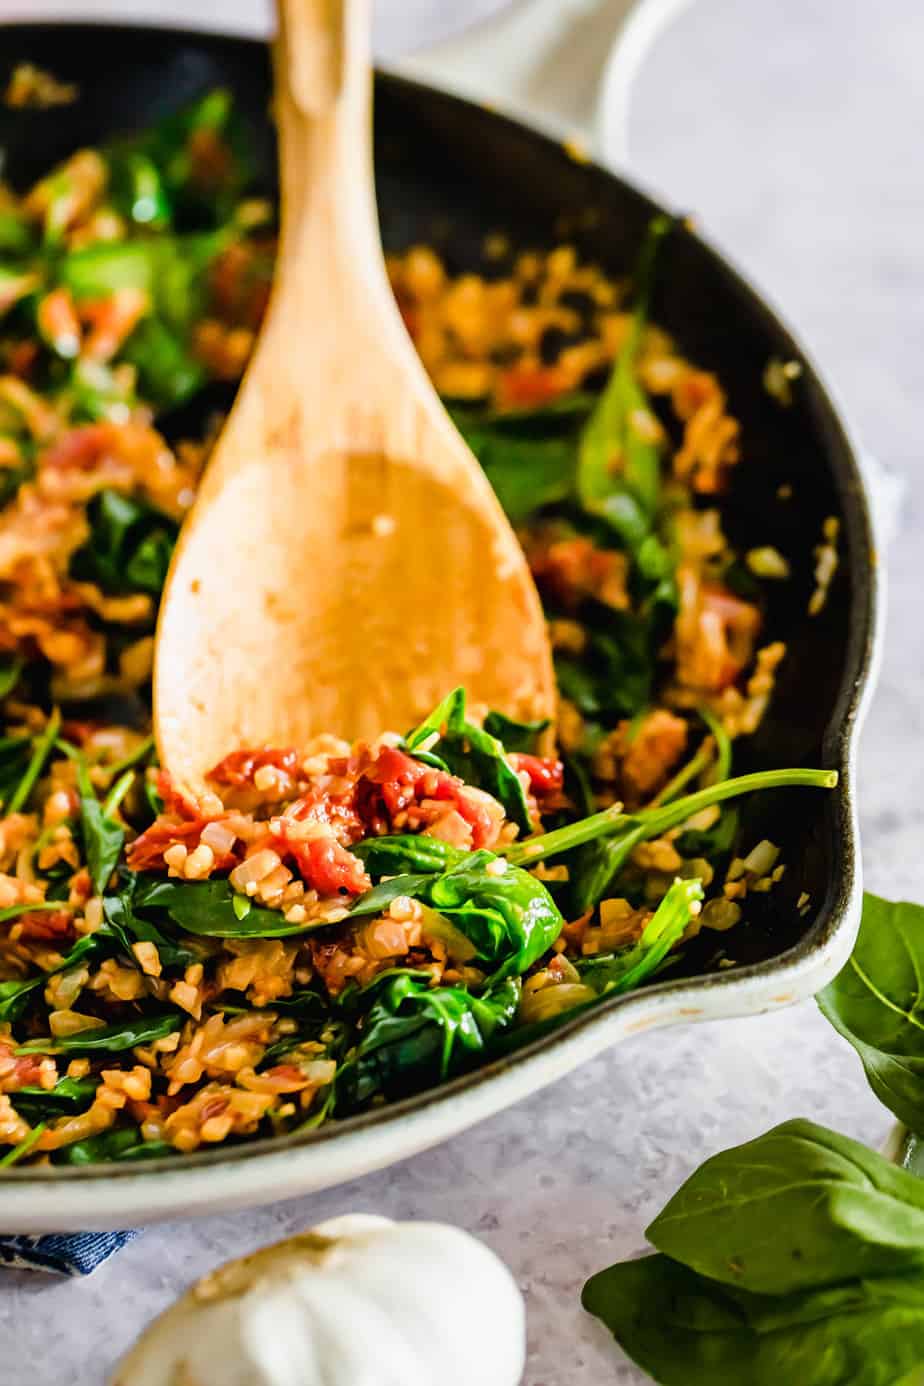 Cooked spinach and vegetables in a skillet with wooden spoon.